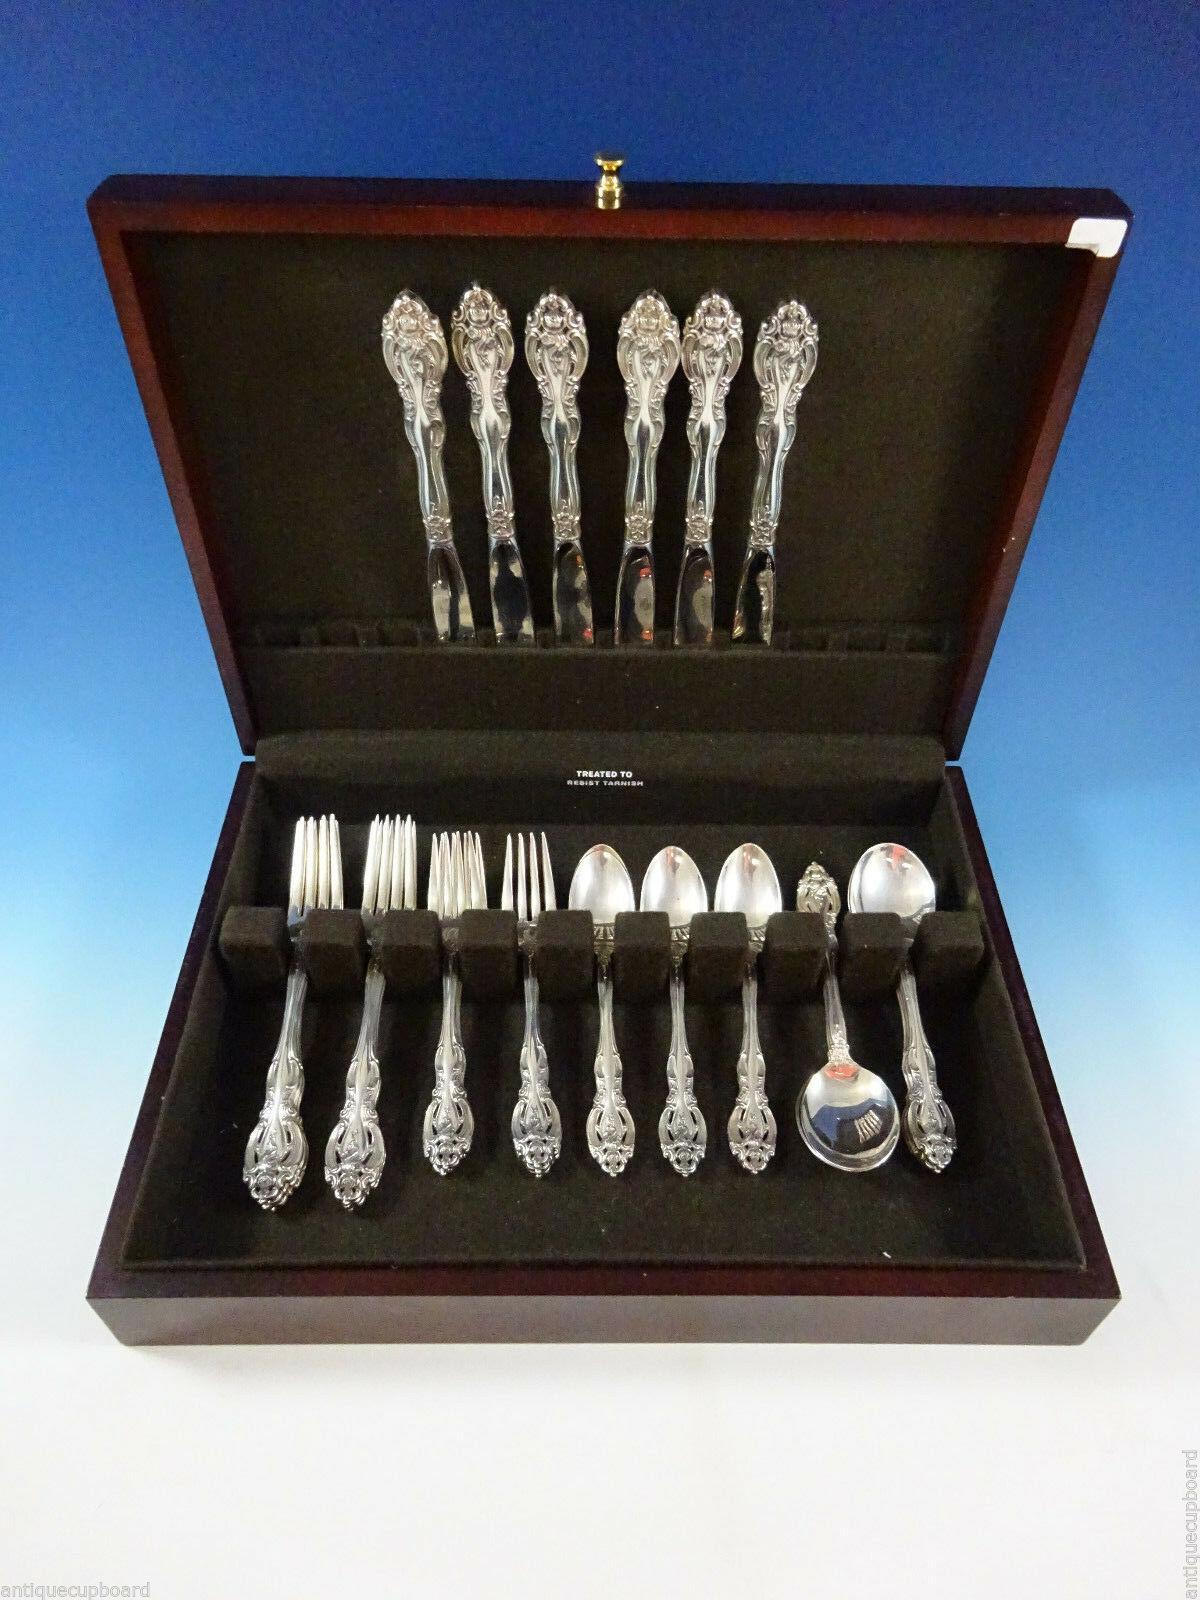 La Scala by Gorham sterling silver flatware set, 30 pieces. Great starter set! This set includes:

6 knives, 9